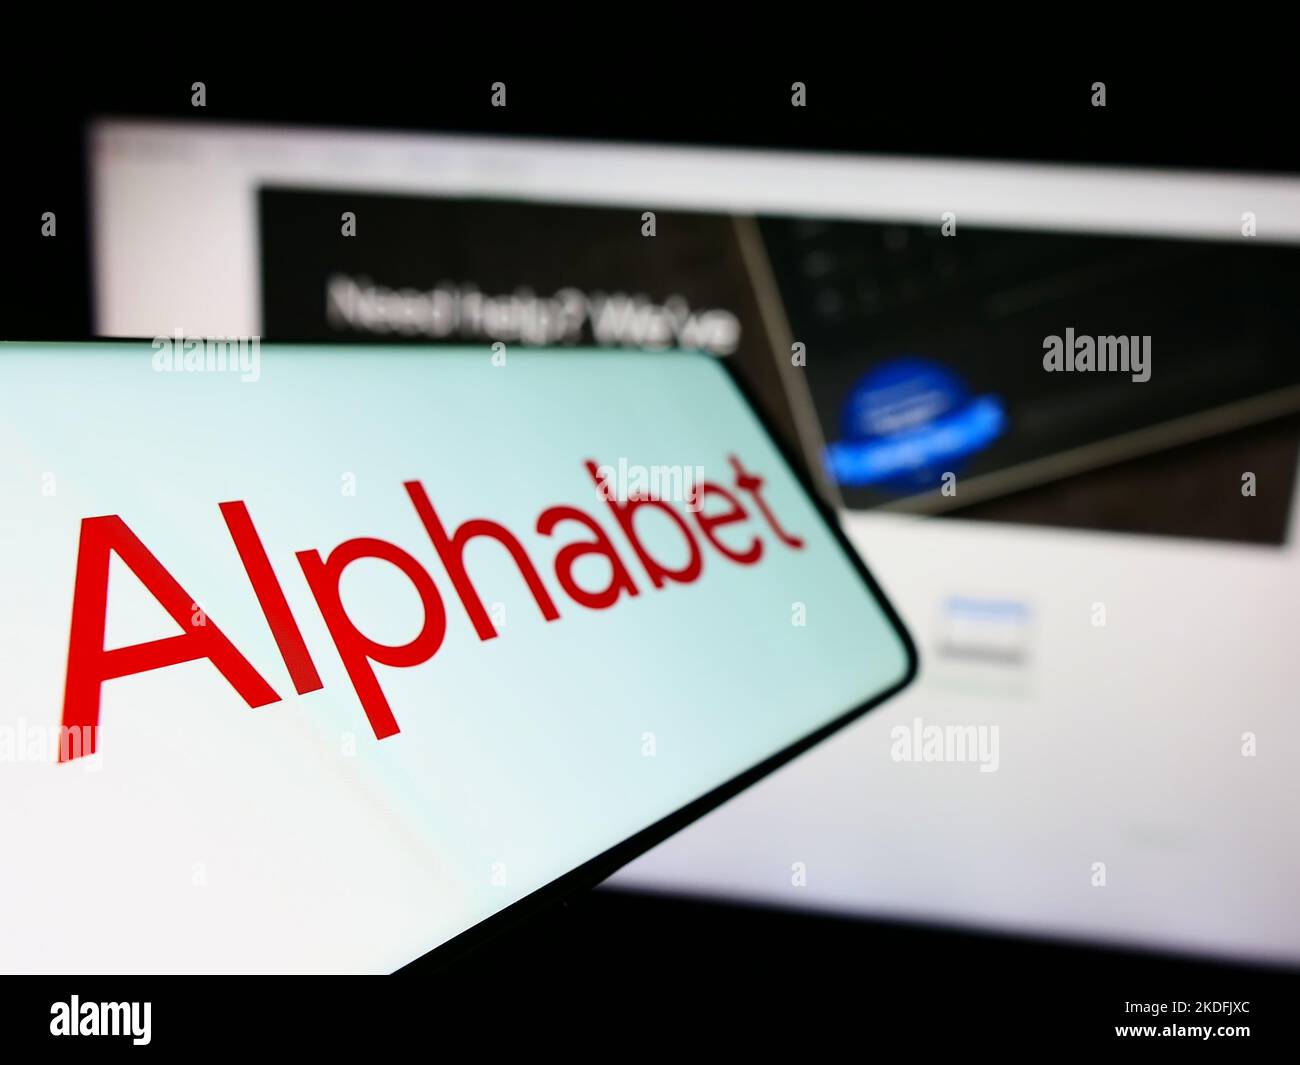 Mobile phone with logo of American holding company Alphabet Inc. (Google) on screen in front of business website. Focus on left of phone display. Stock Photo